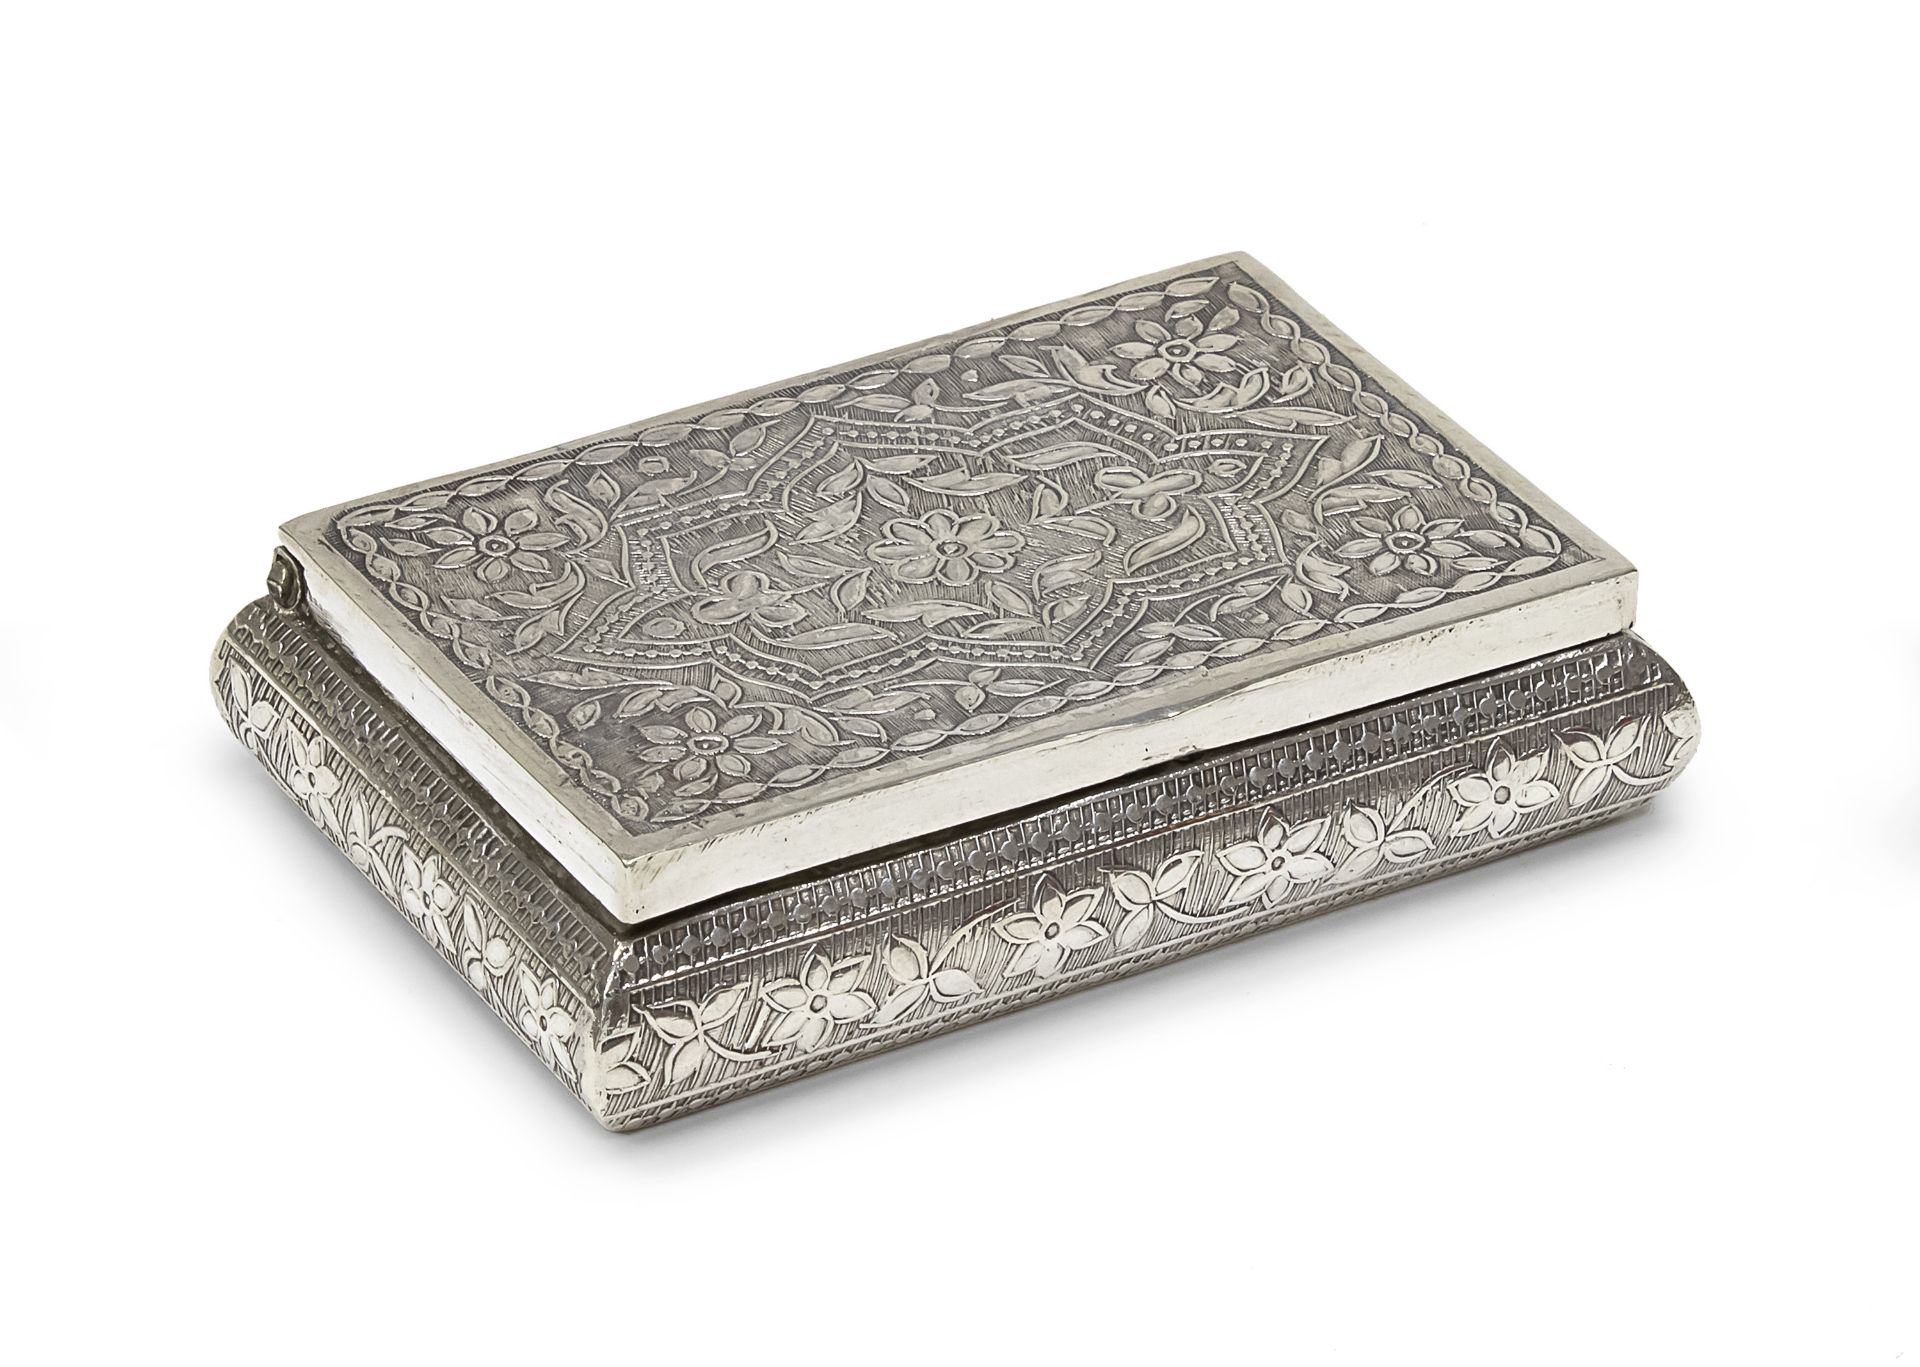 SILVER SNUFFBOX KINGDOM OF ITALY END OF THE 19TH CENTURY